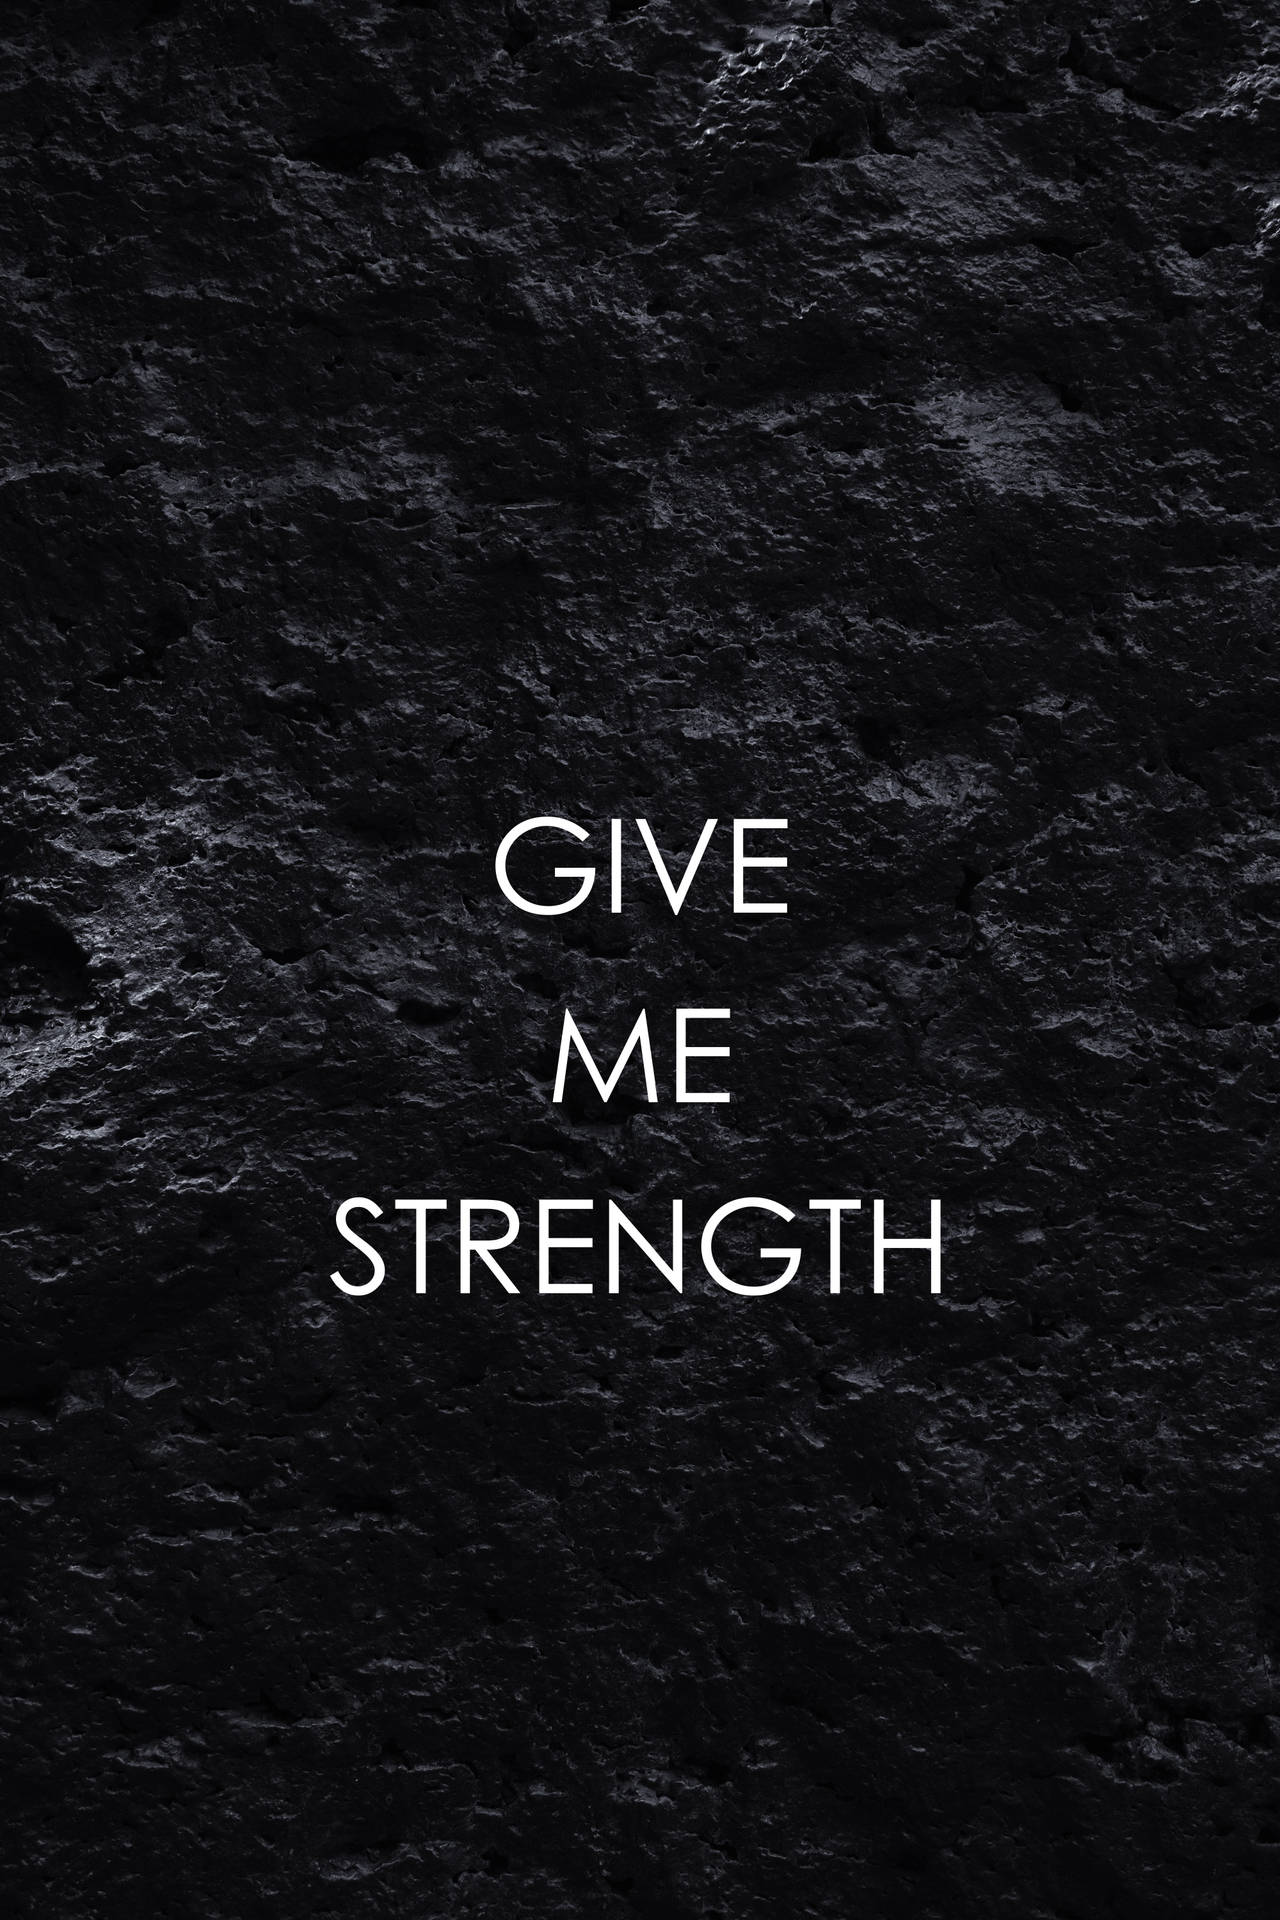 Motivational Quote To Give Strength Wallpaper